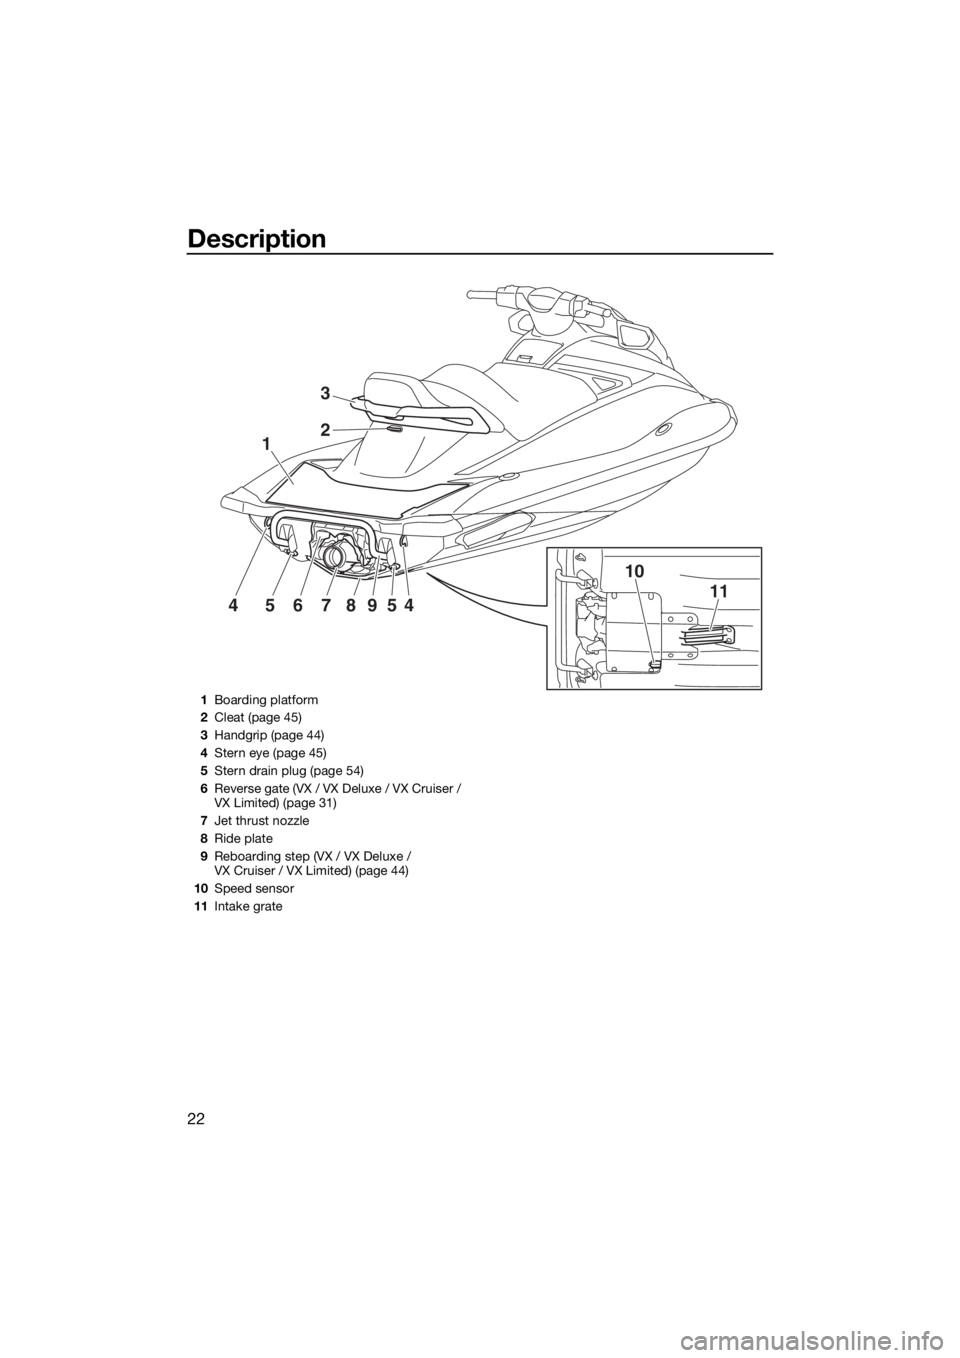 YAMAHA VX 2019 Owners Manual Description
22
1
10
1145678954
2
3
1Boarding platform
2Cleat (page 45)
3Handgrip (page 44)
4Stern eye (page 45)
5Stern drain plug (page 54)
6Reverse gate (VX / VX Deluxe / VX Cruiser / 
VX Limited) (p